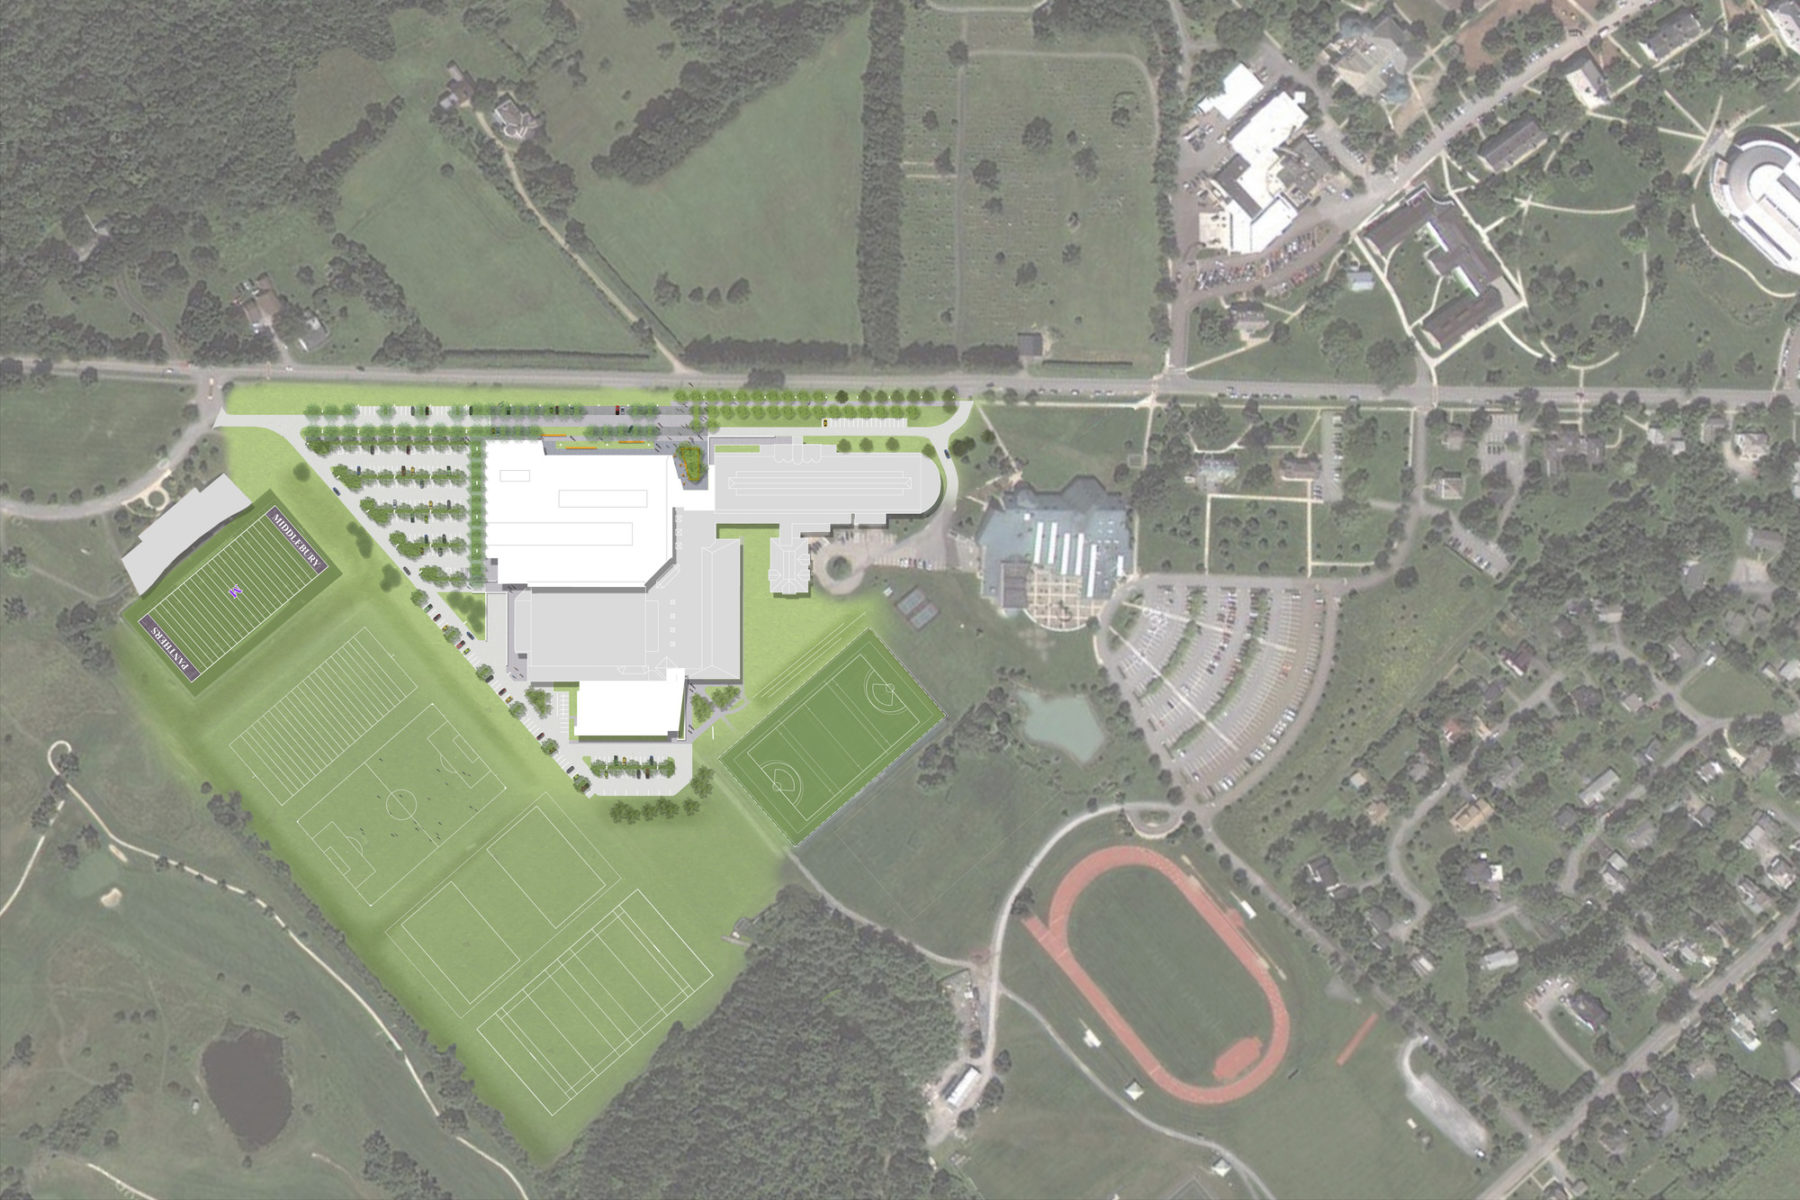 Plan for middlebury site